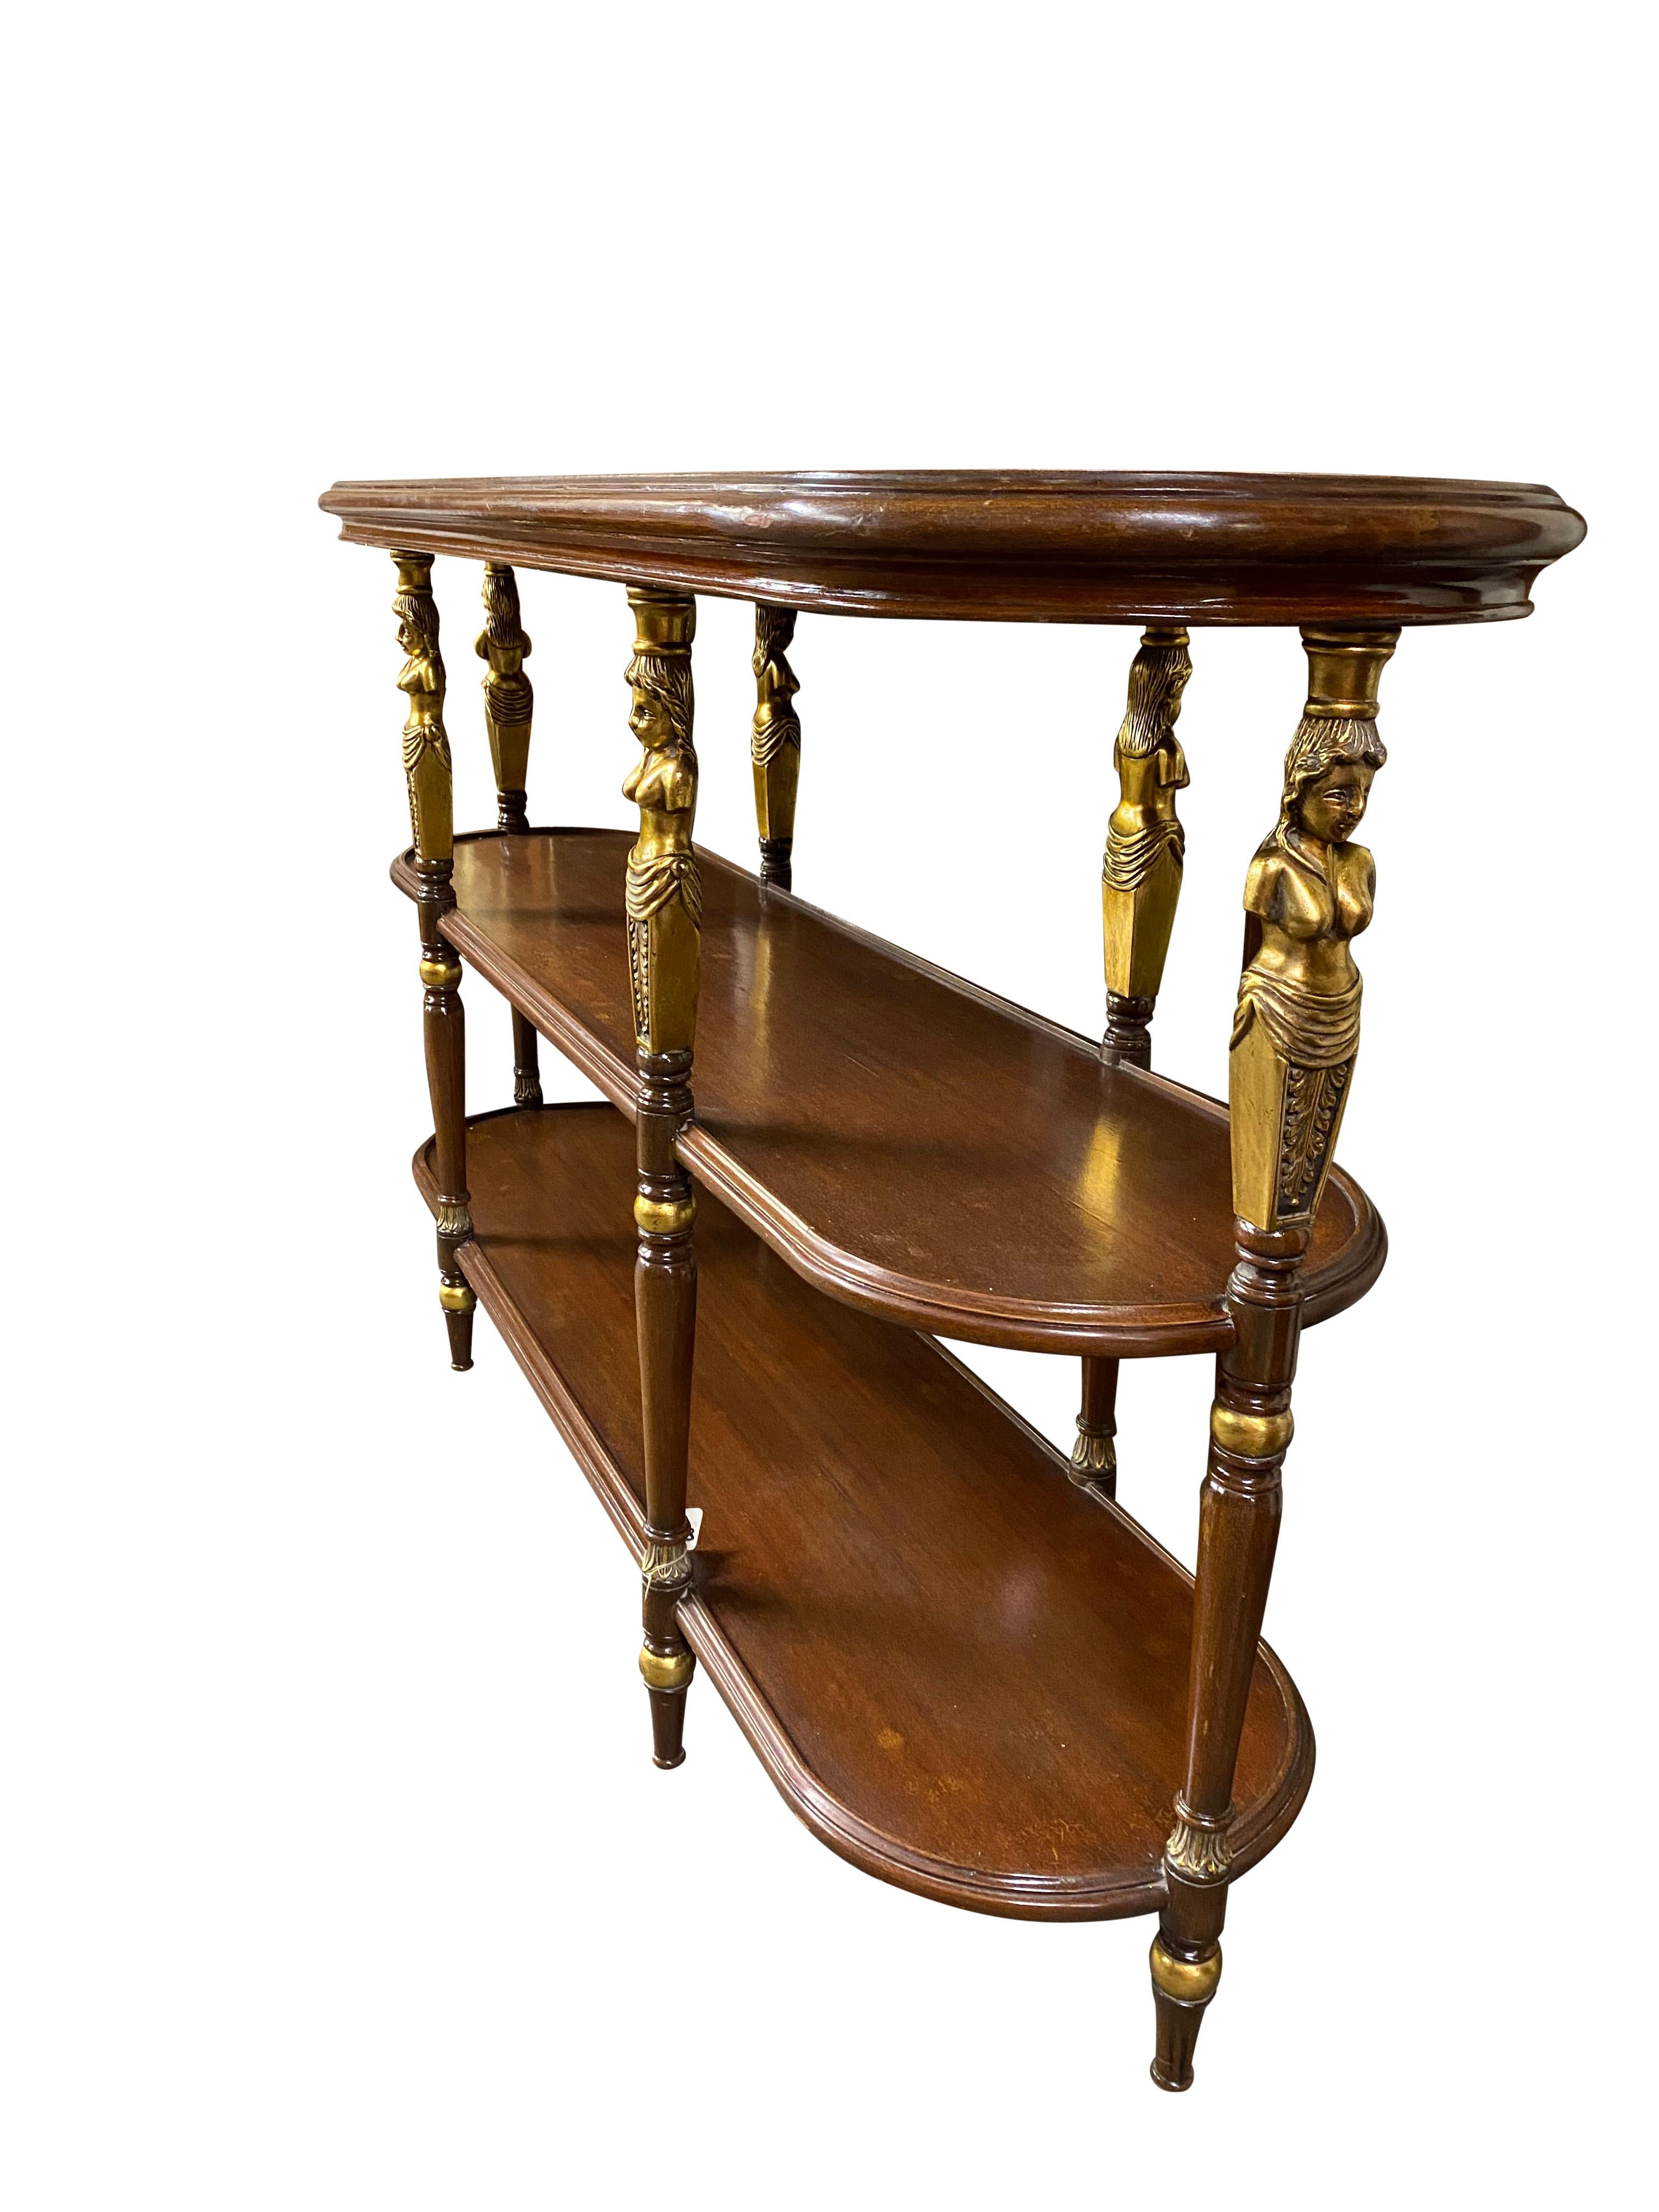 20th Century French Empire Style Open Bookcase/Etagere Tiered Table For Sale 10